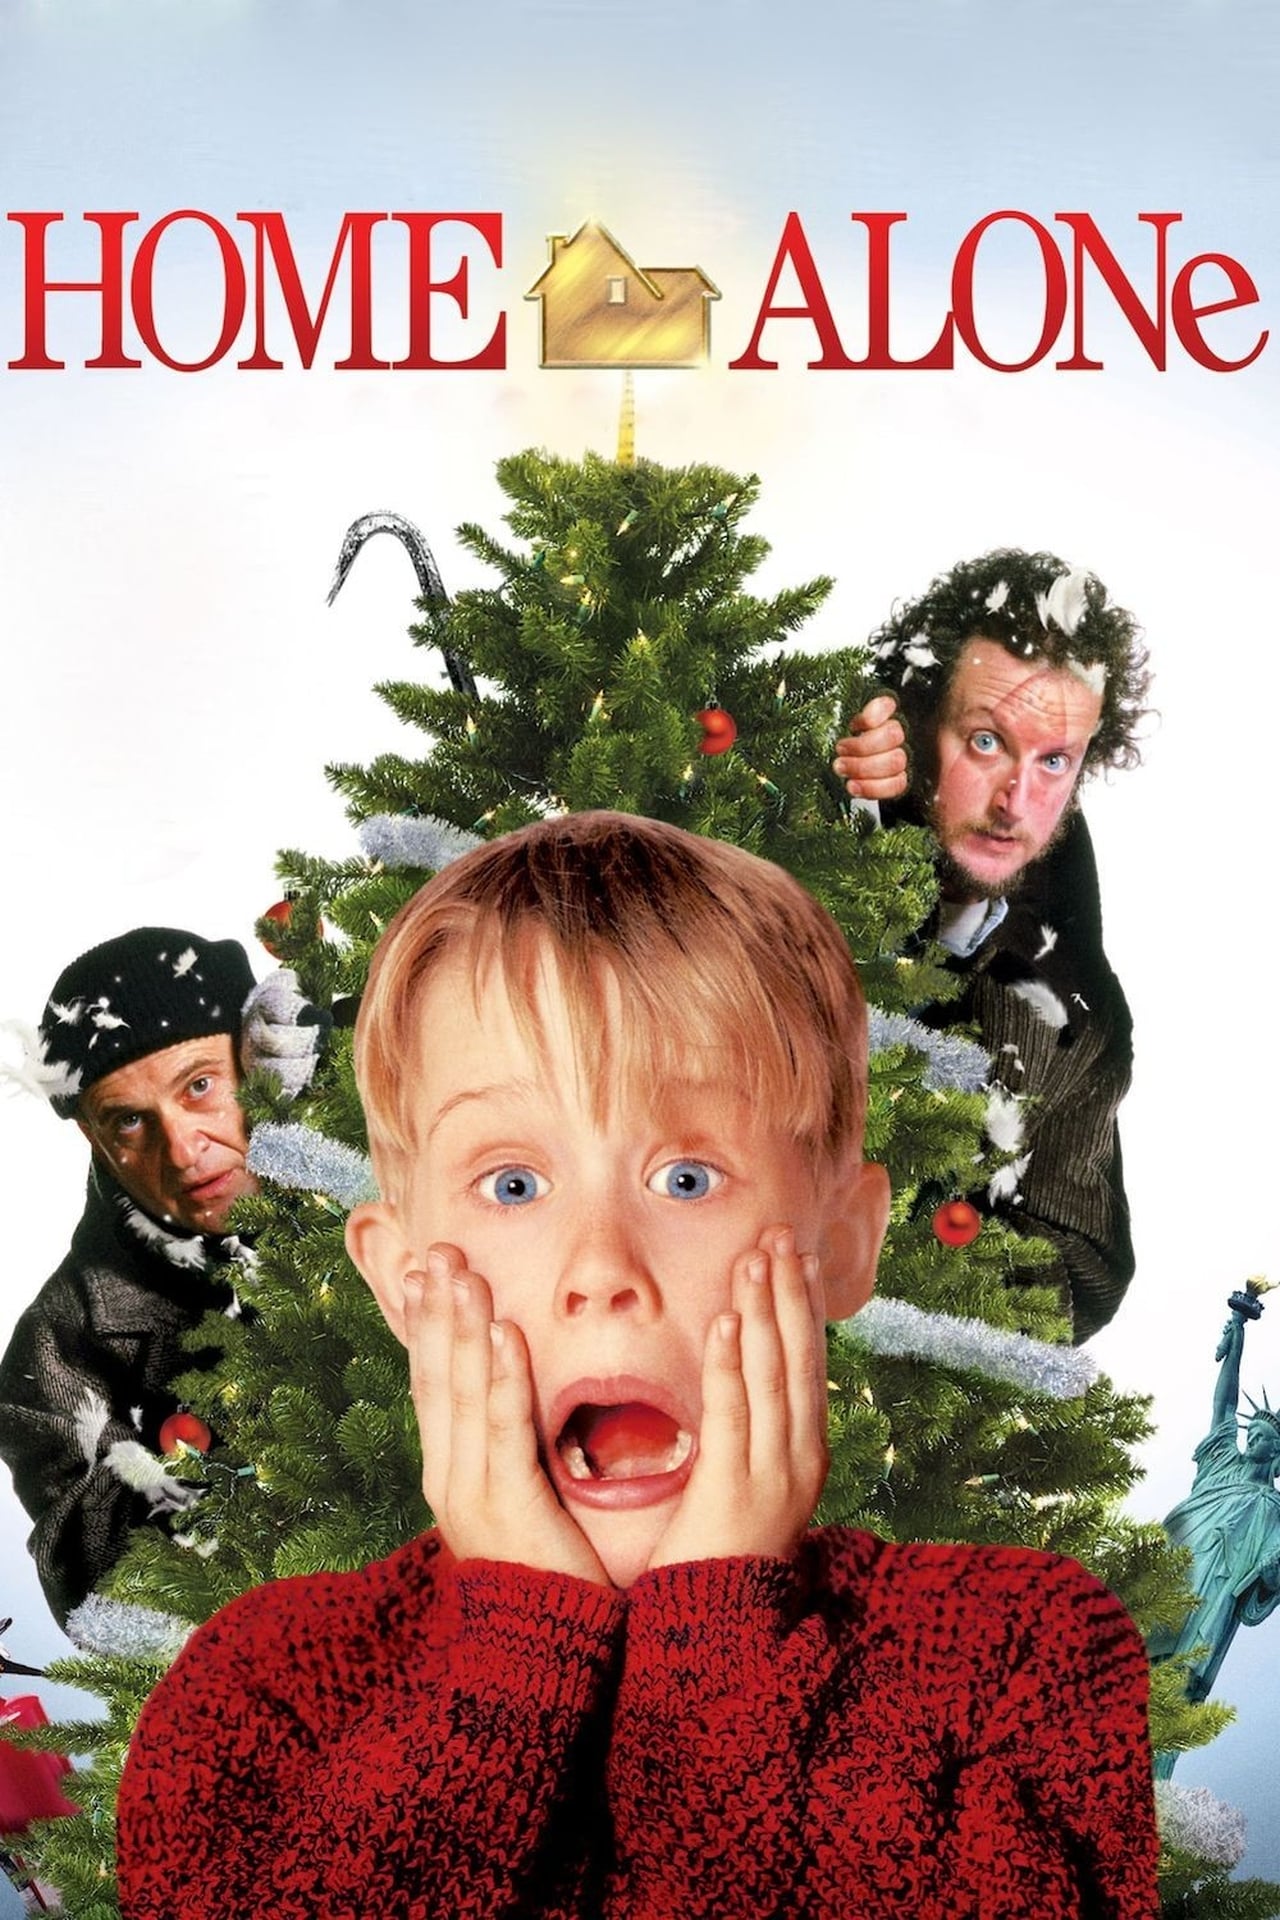 Home alone full movie free download camp pinewood game download